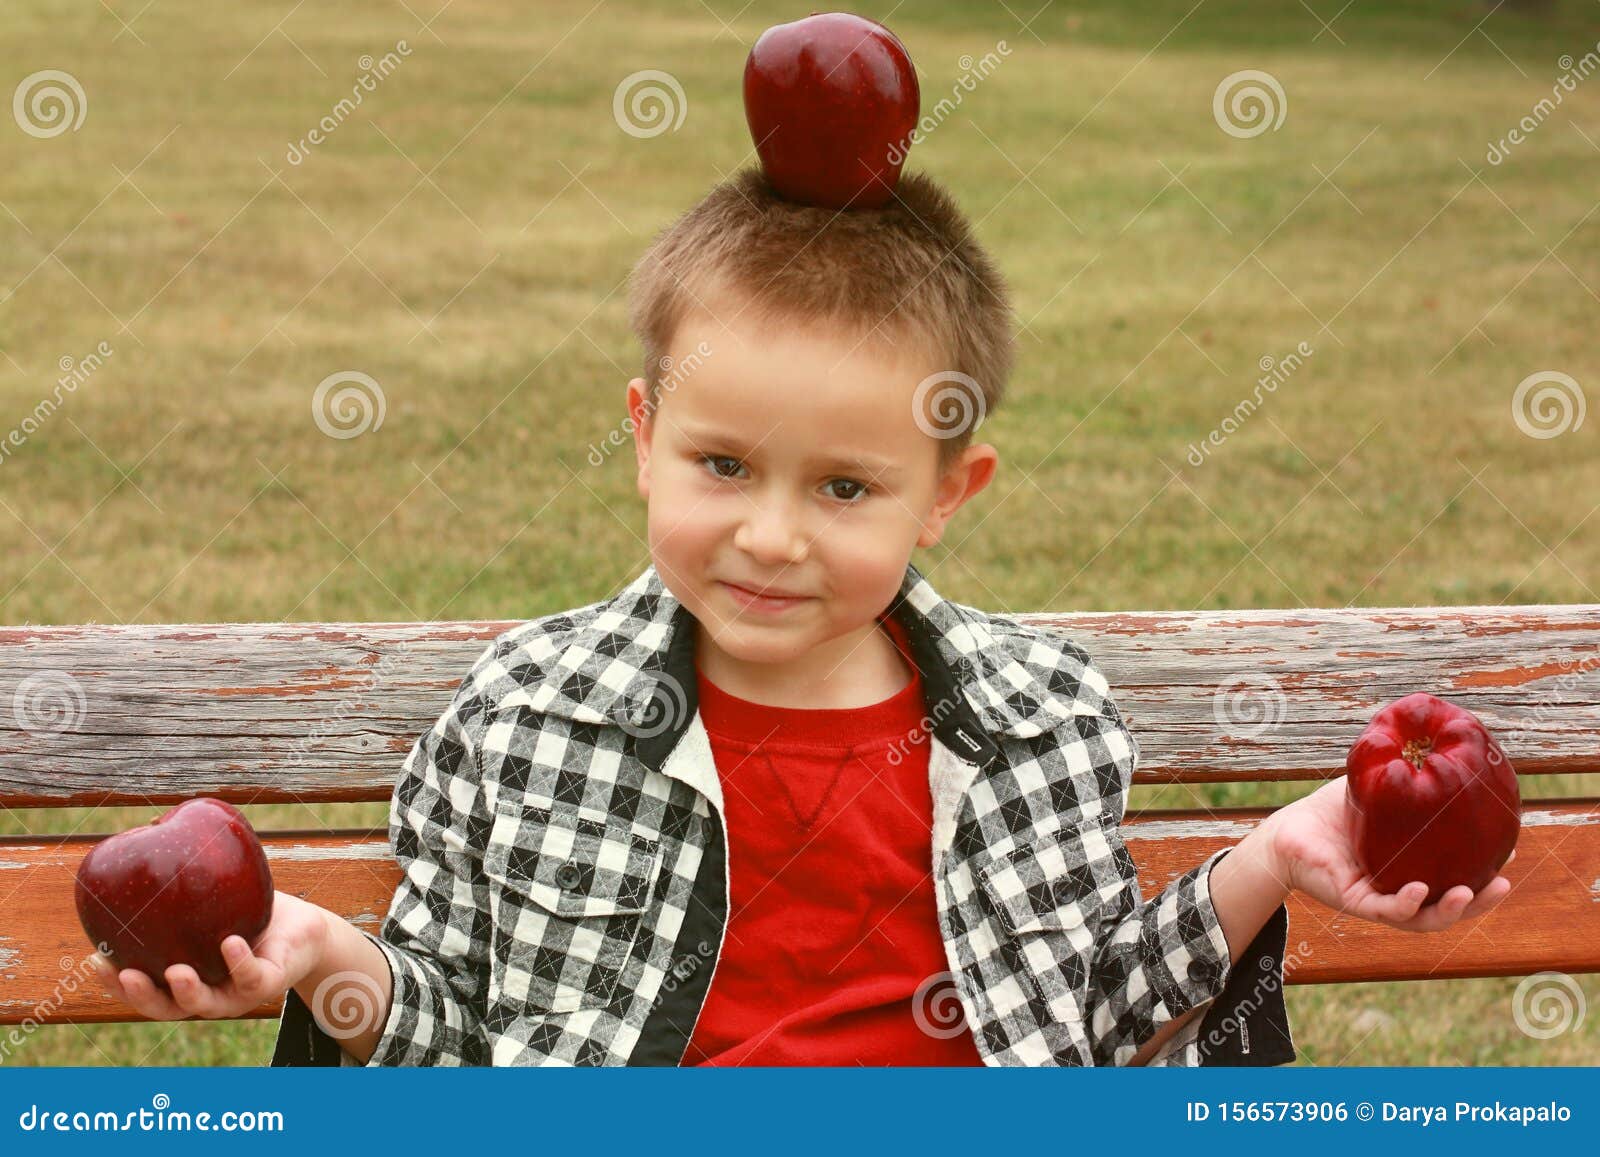 Lovely Smiling Boy with Apples Stock Photo - Image of apple, grass ...